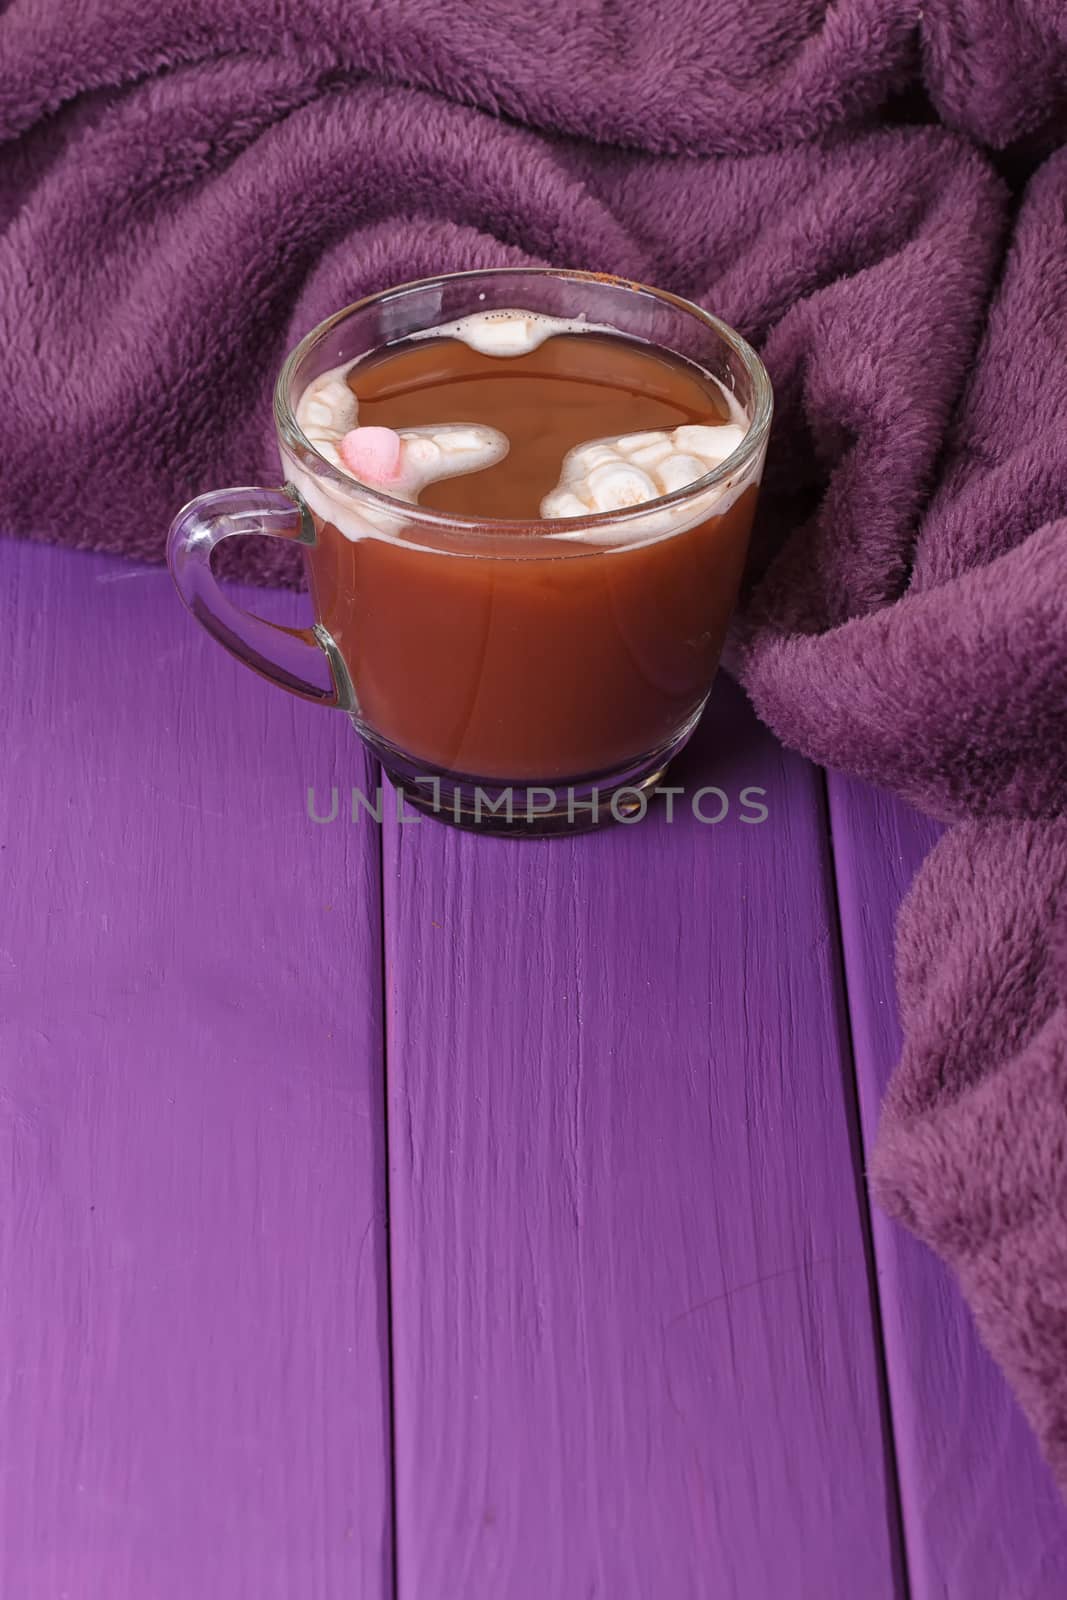 hot chocolate, cozy knitted blanket. by victosha